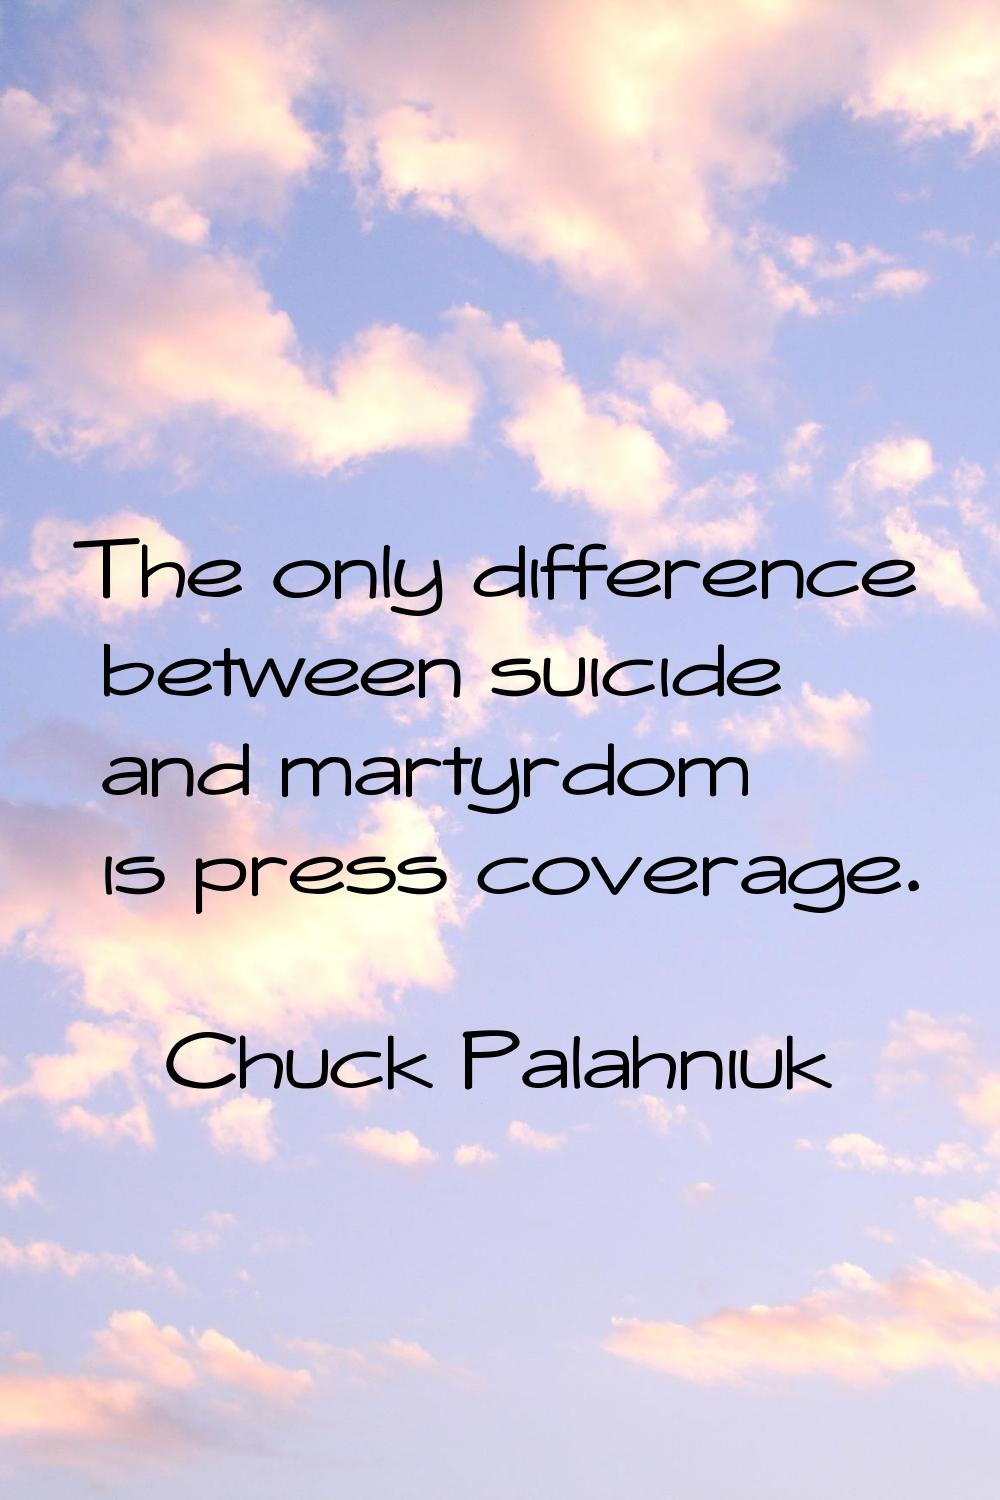 The only difference between suicide and martyrdom is press coverage.